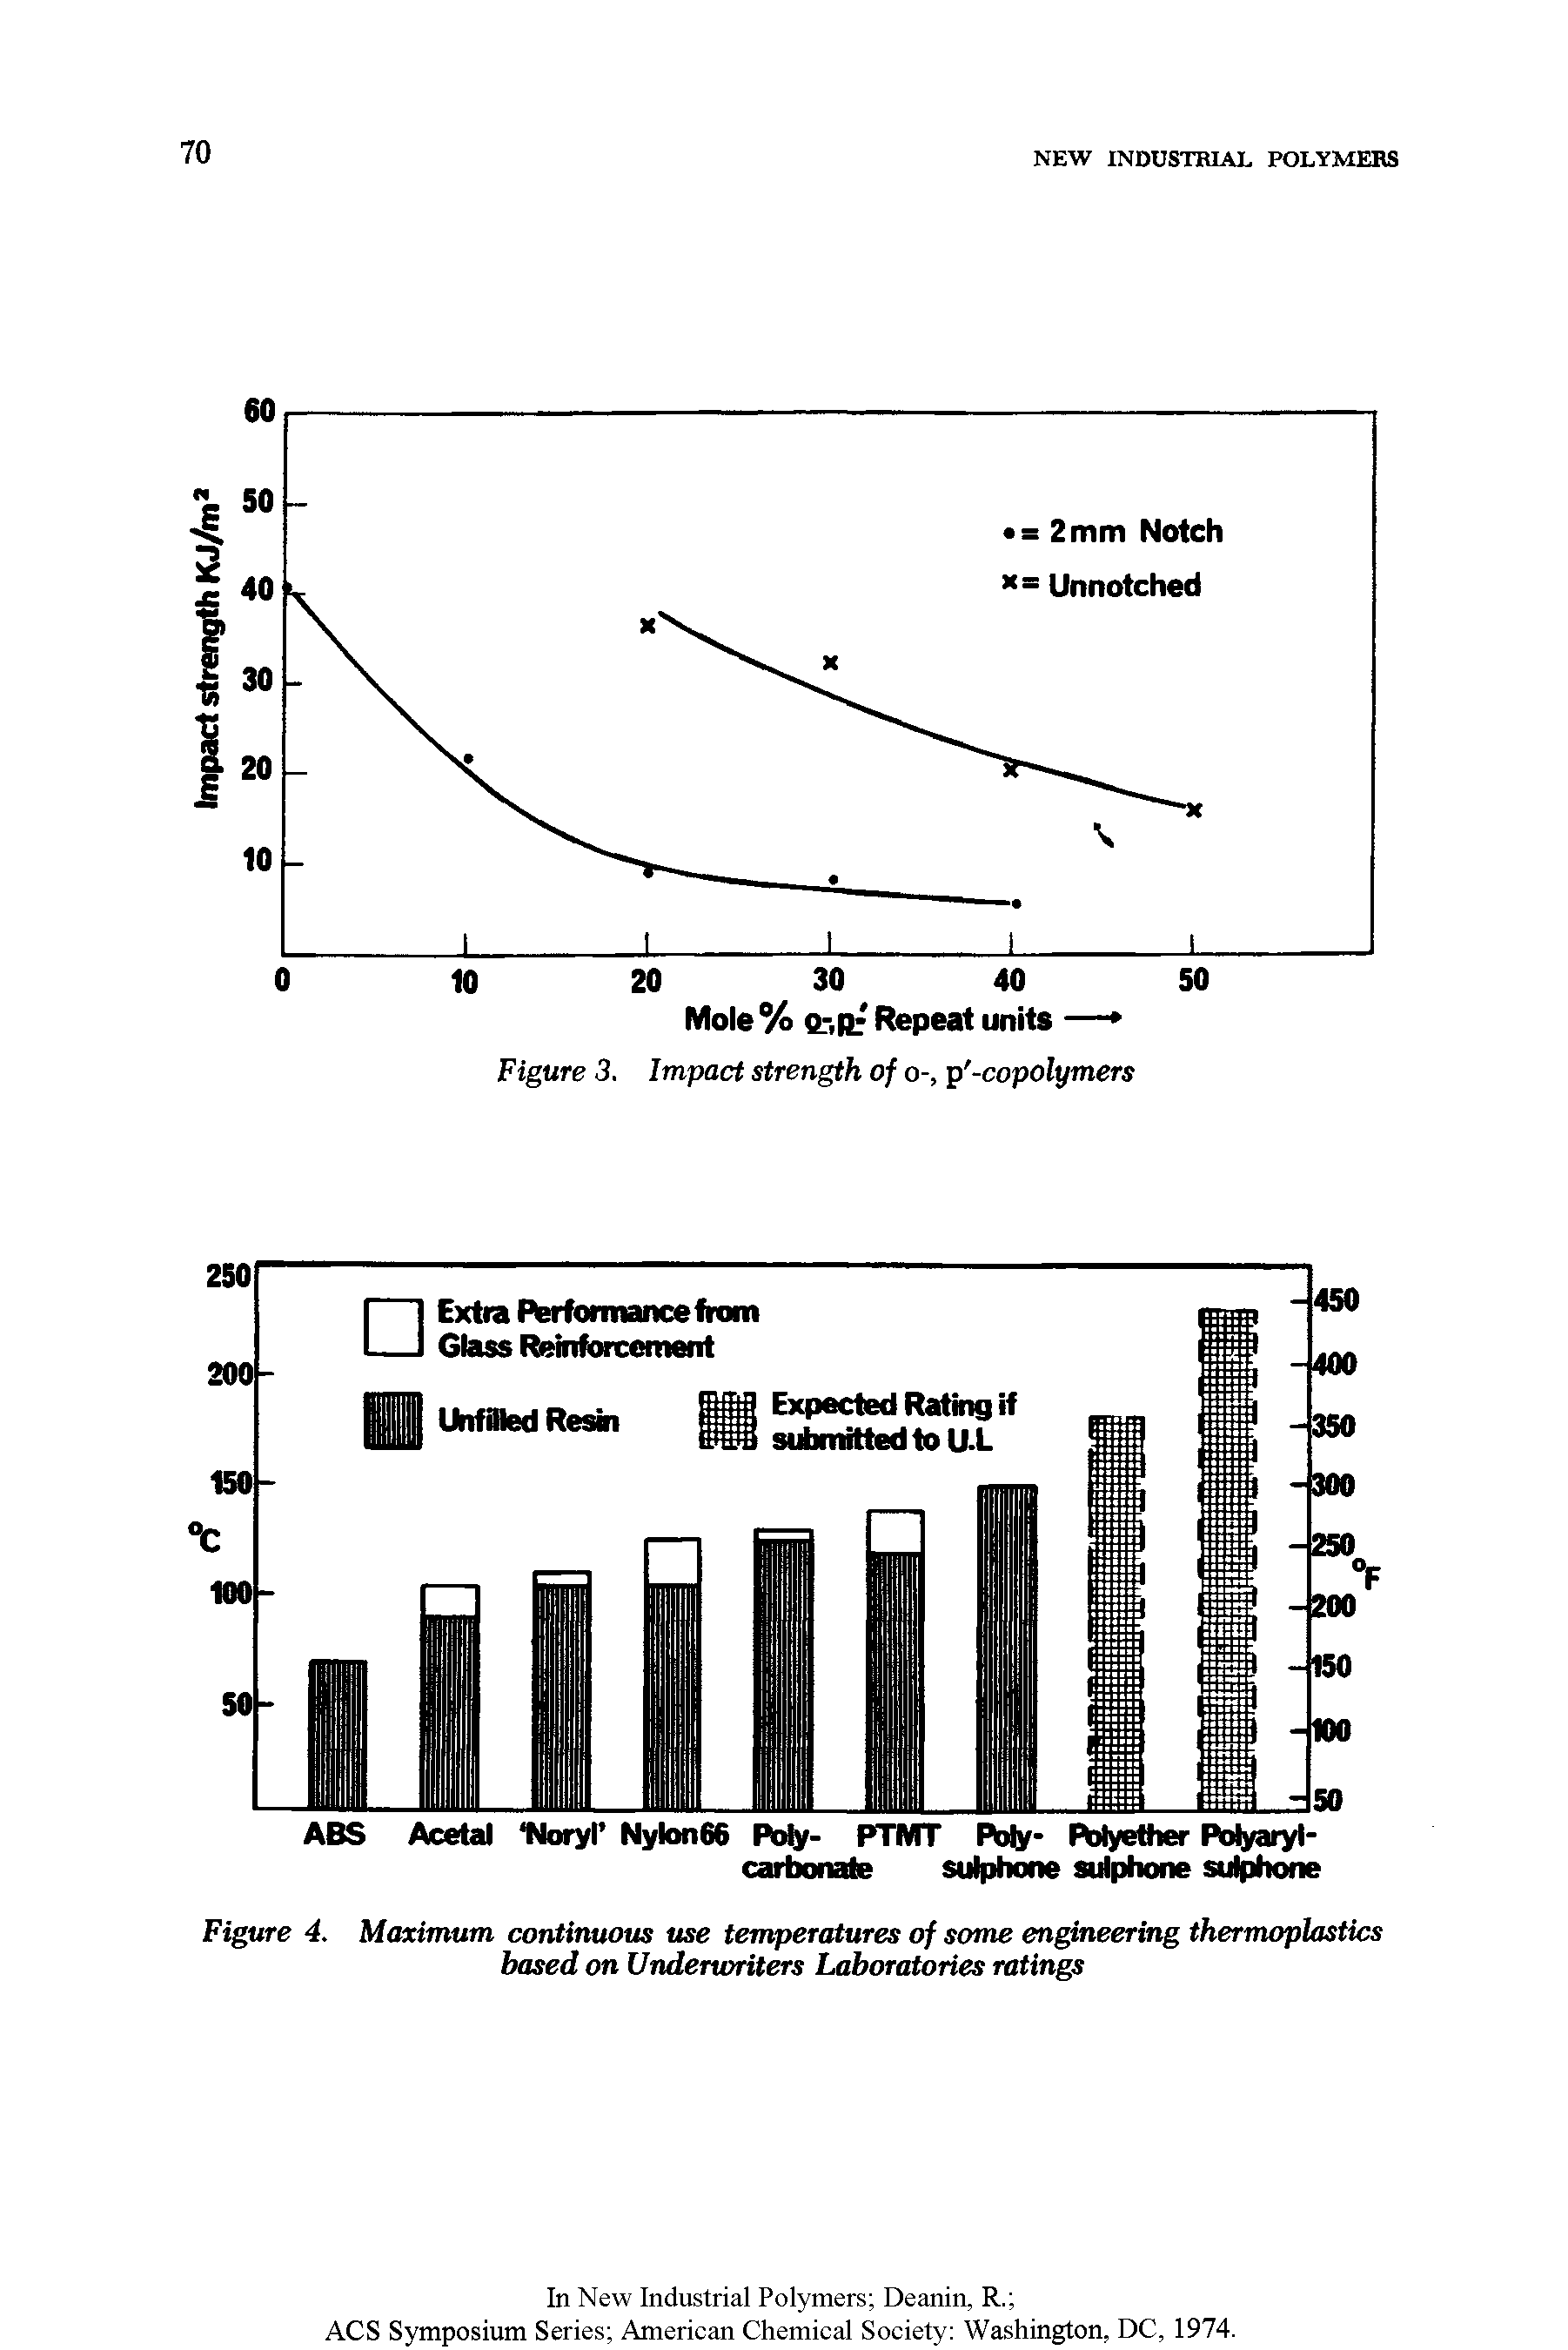 Figure 4. Maximum continuous use temperatures of some engineering thermoplastics based on Underwriters Laboratories ratings...